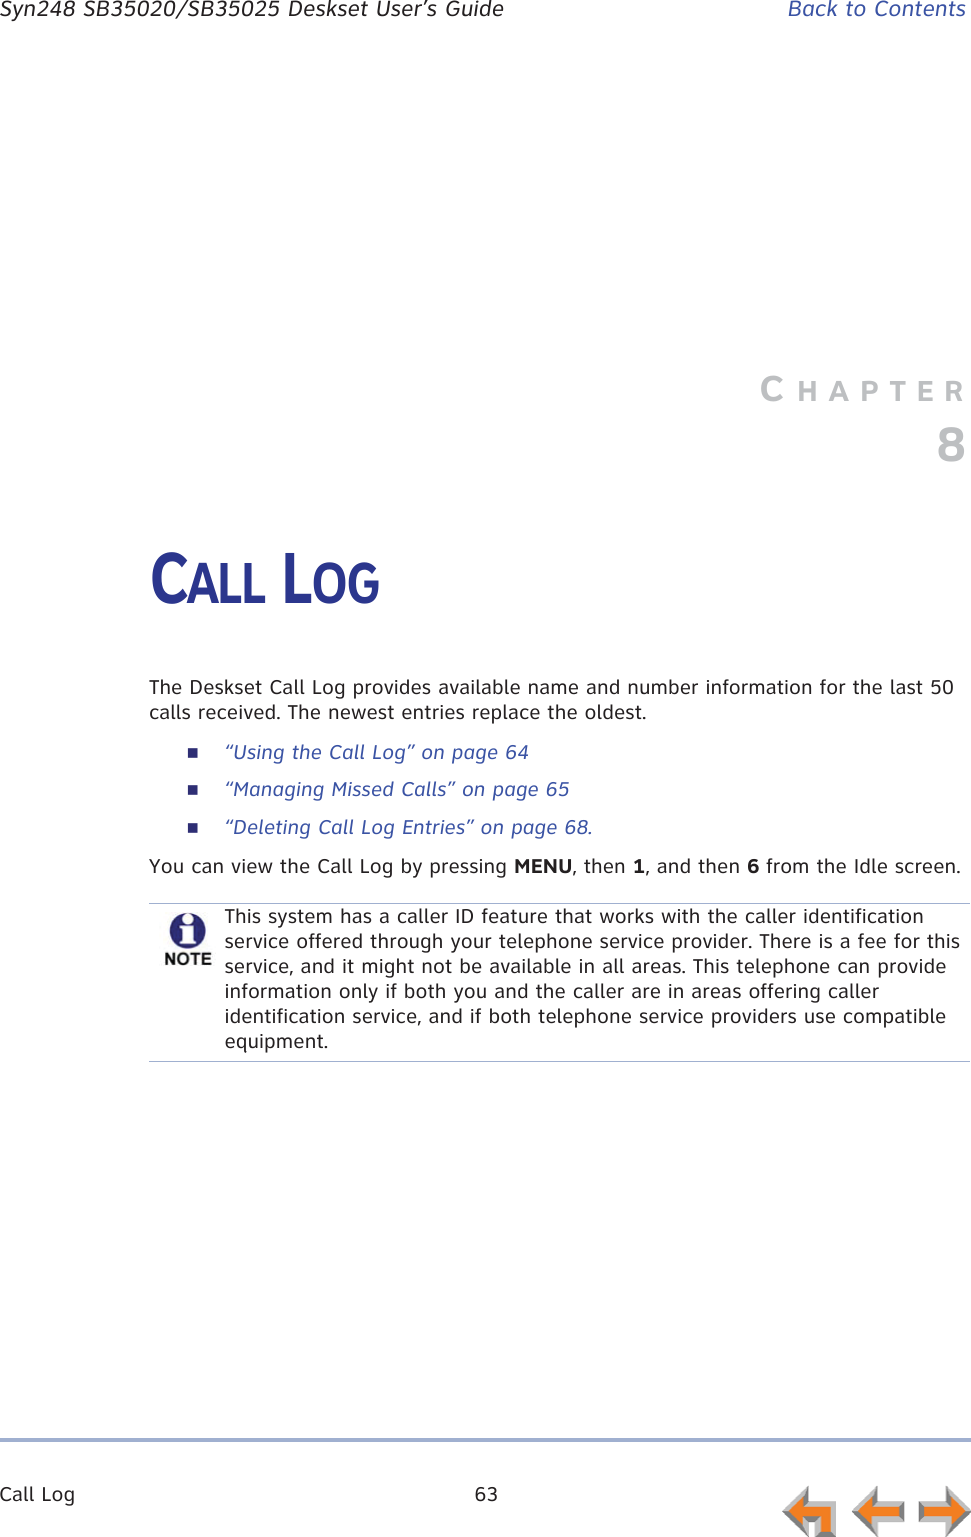 Call Log 63      Syn248 SB35020/SB35025 Deskset User’s Guide Back to ContentsCHAPTER8CALL LOGThe Deskset Call Log provides available name and number information for the last 50 calls received. The newest entries replace the oldest.“Using the Call Log” on page 64“Managing Missed Calls” on page 65“Deleting Call Log Entries” on page 68.You can view the Call Log by pressing MENU, then 1, and then 6 from the Idle screen.This system has a caller ID feature that works with the caller identification service offered through your telephone service provider. There is a fee for this service, and it might not be available in all areas. This telephone can provide information only if both you and the caller are in areas offering caller identification service, and if both telephone service providers use compatible equipment.